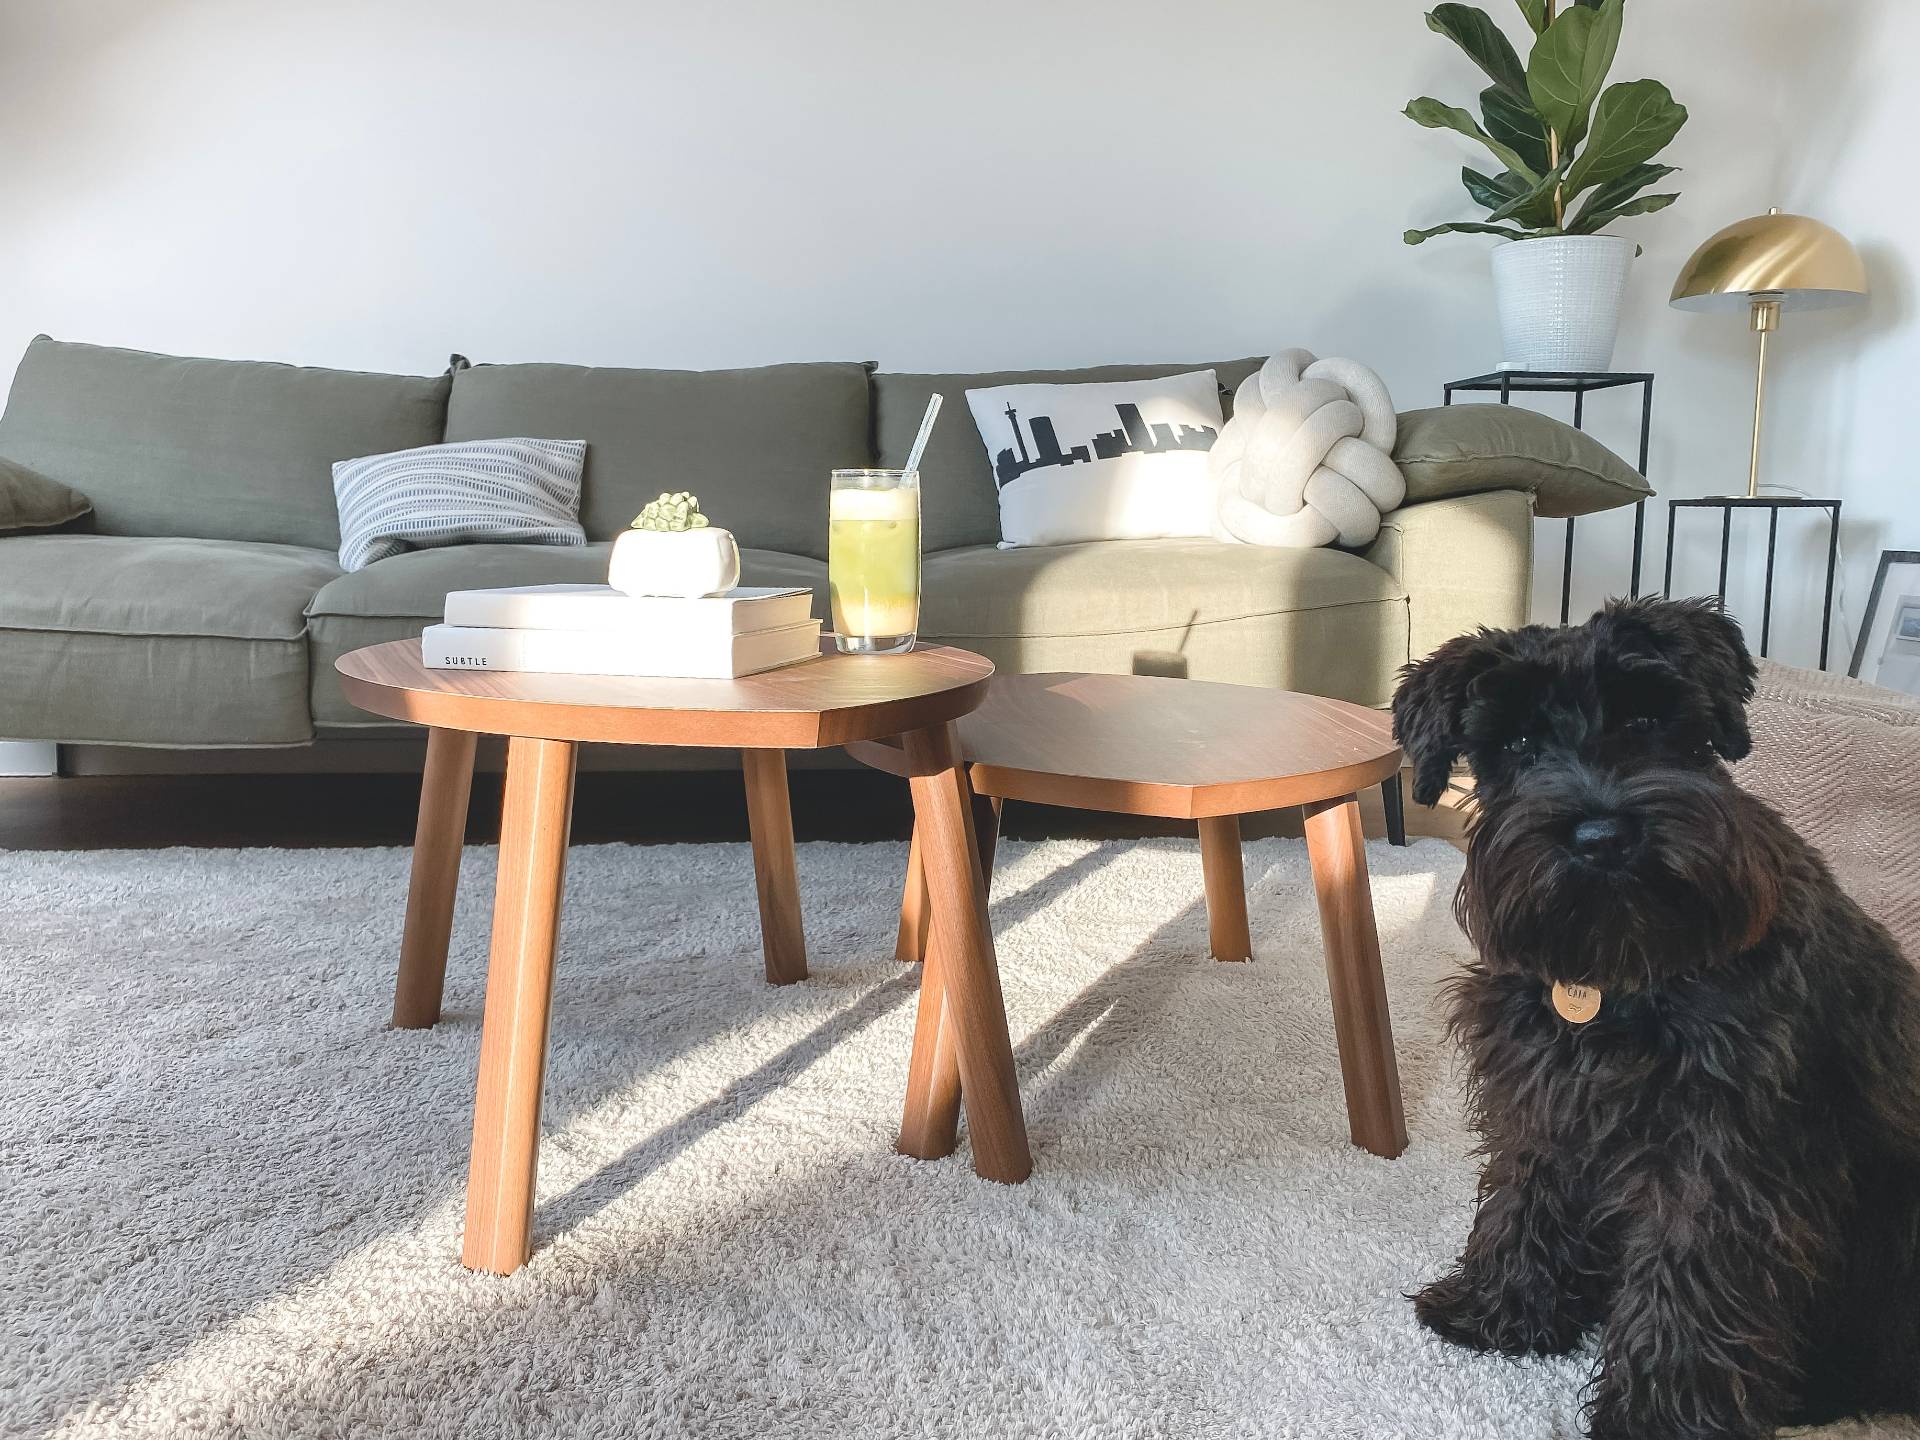 Image of dog in living room